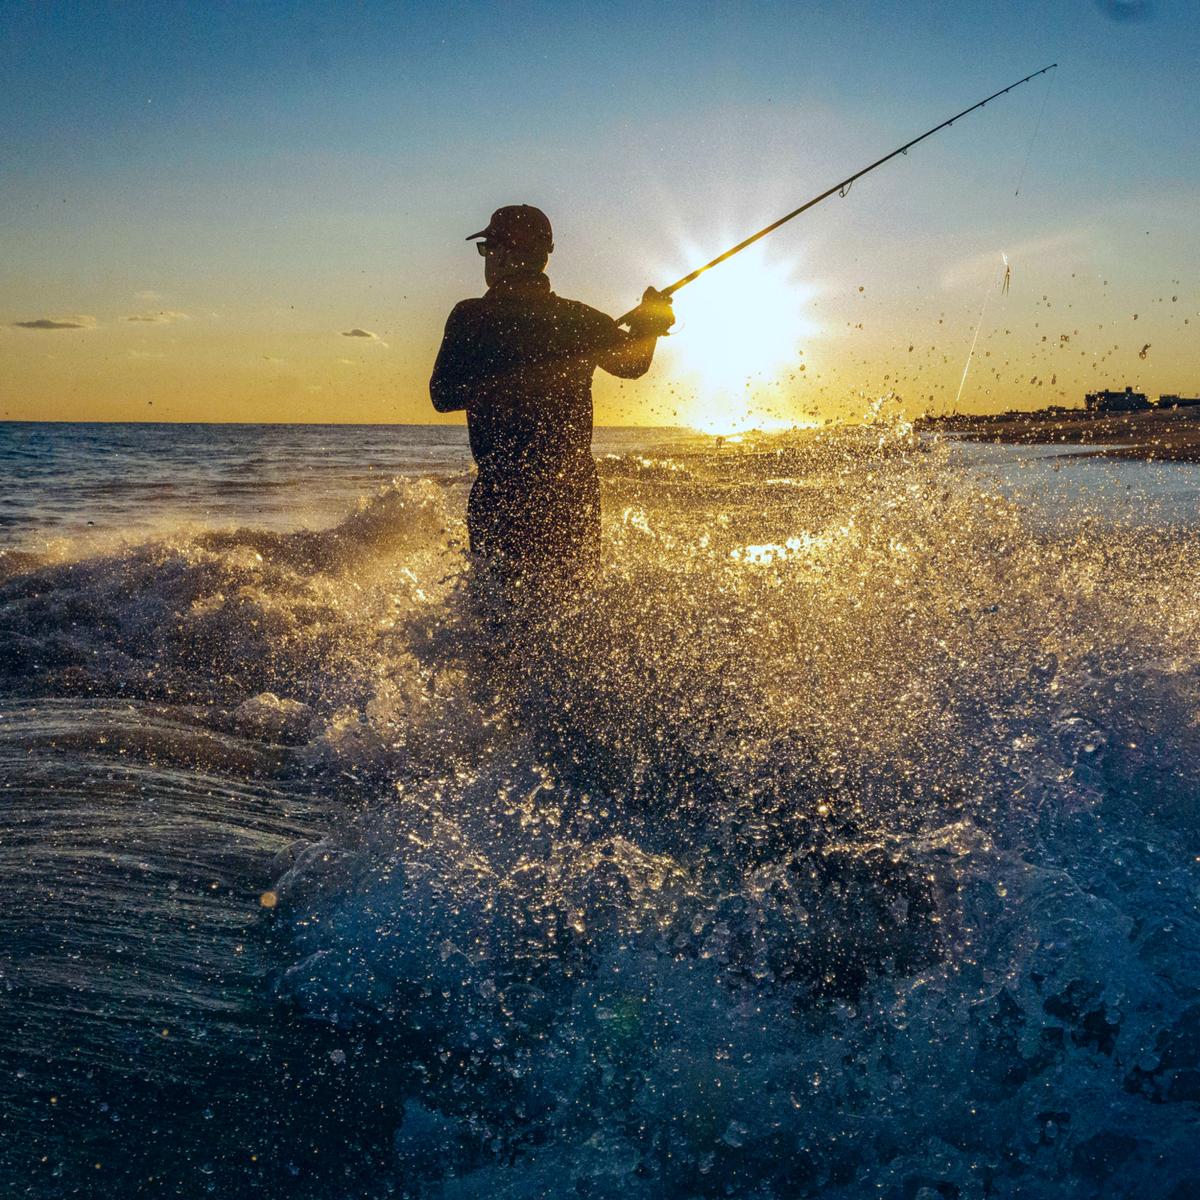 Fishing for Adventure: For the Ultimate Vacation, Book a Luxury Fishing Charter